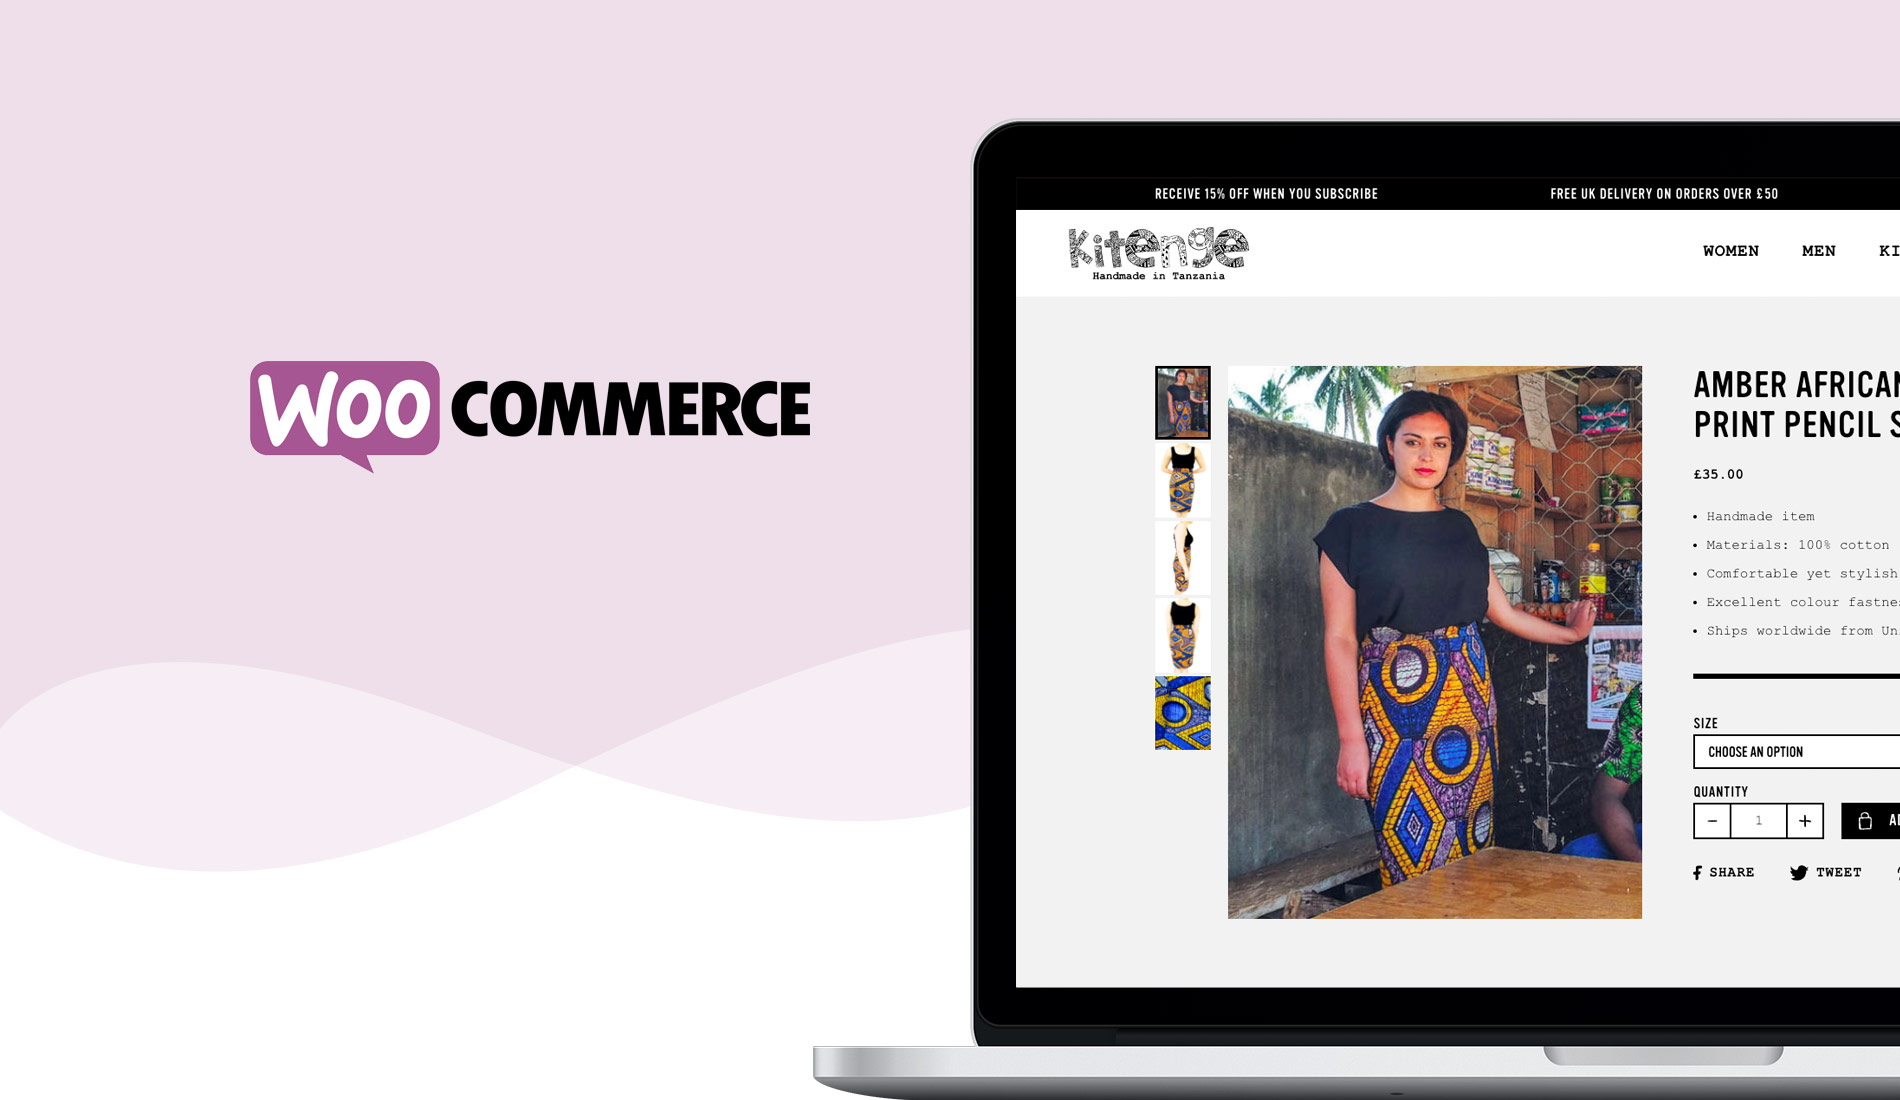 Kitenge Shop is a custom Woocommerce eCommerce store designed and built by London web design agency Fhoke.